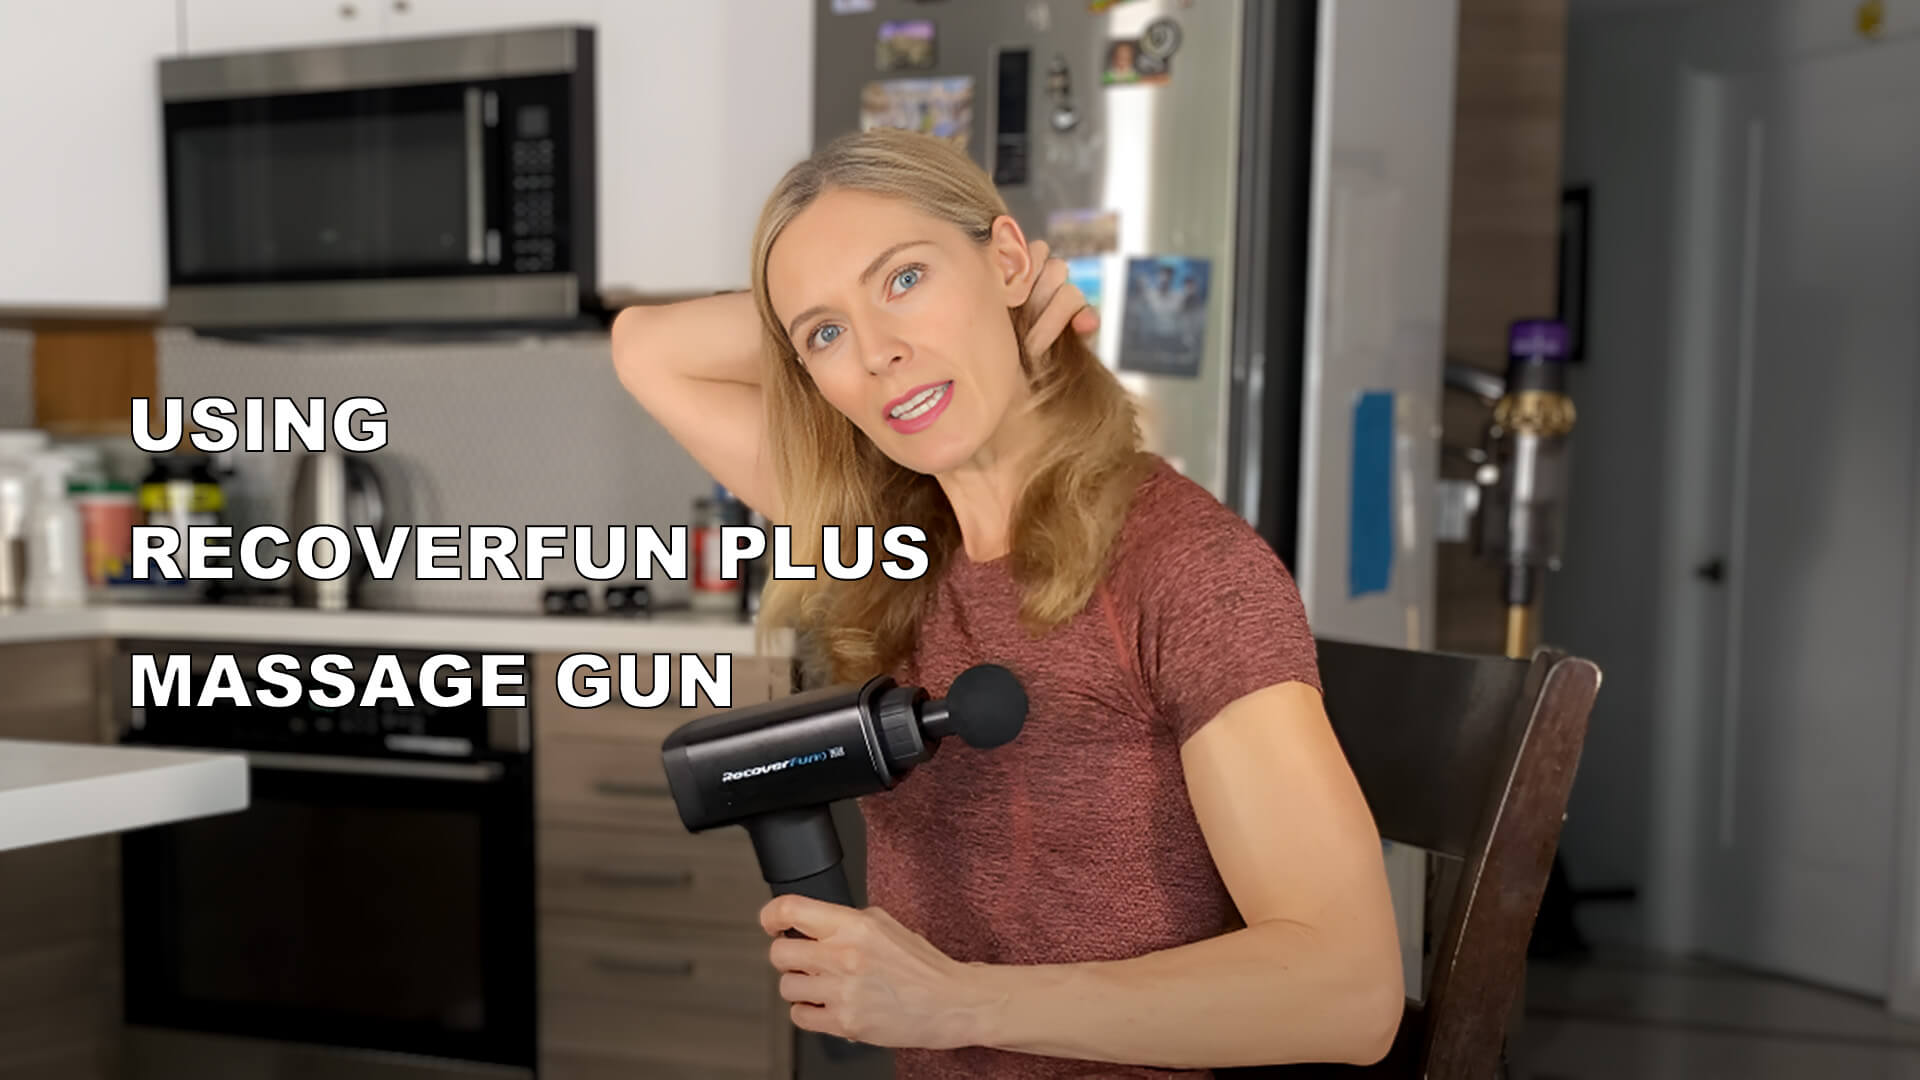 Load video: how to use massage gun